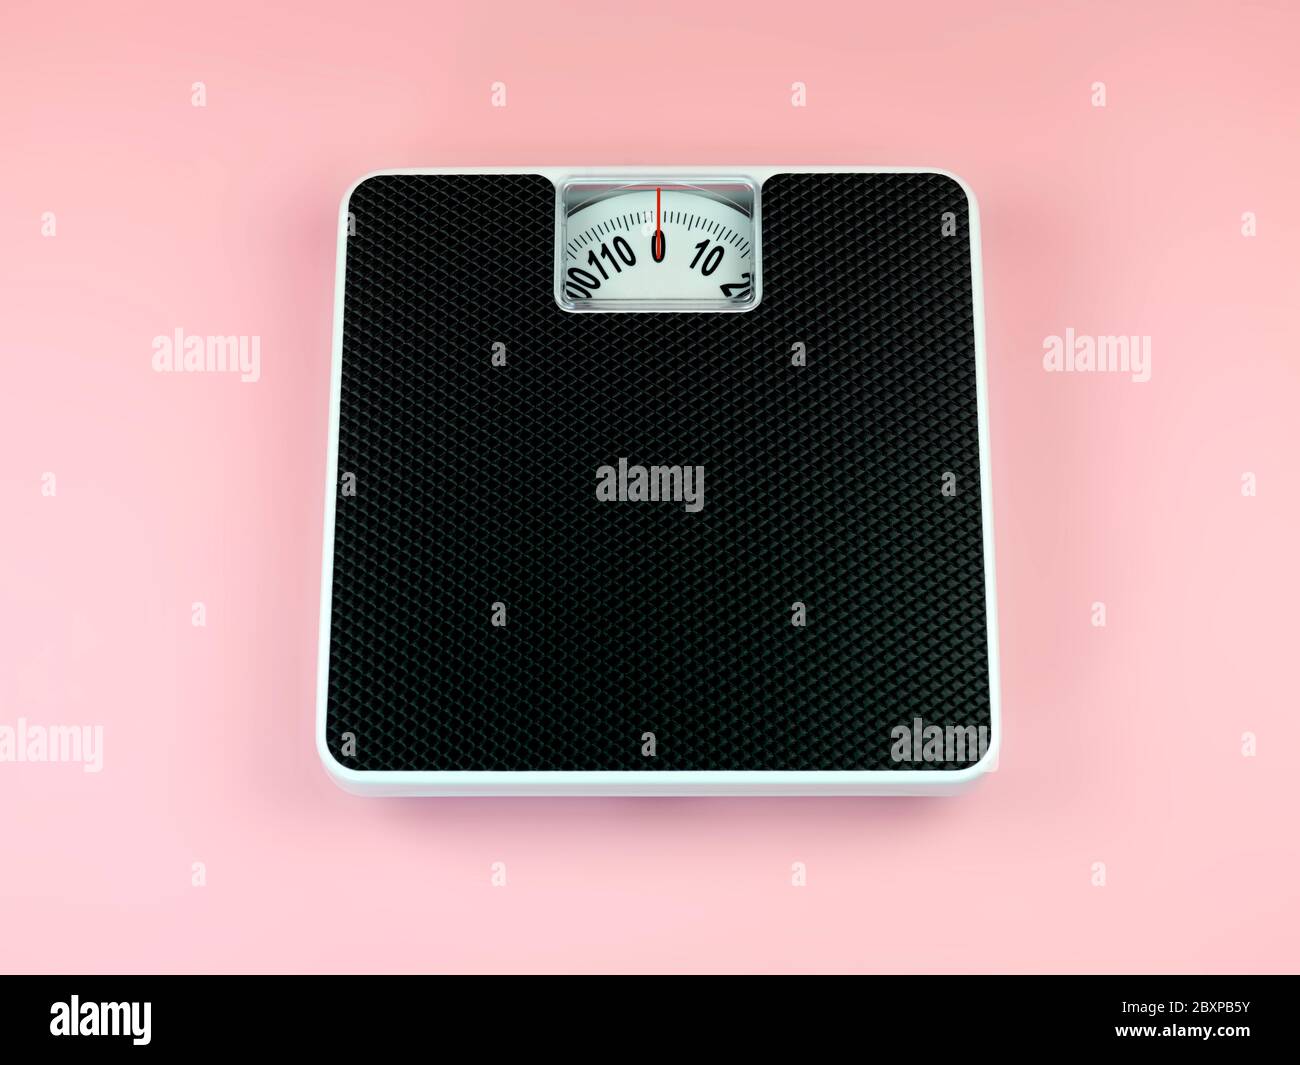 Vintage pink home weight scale isolated with clipping path Stock